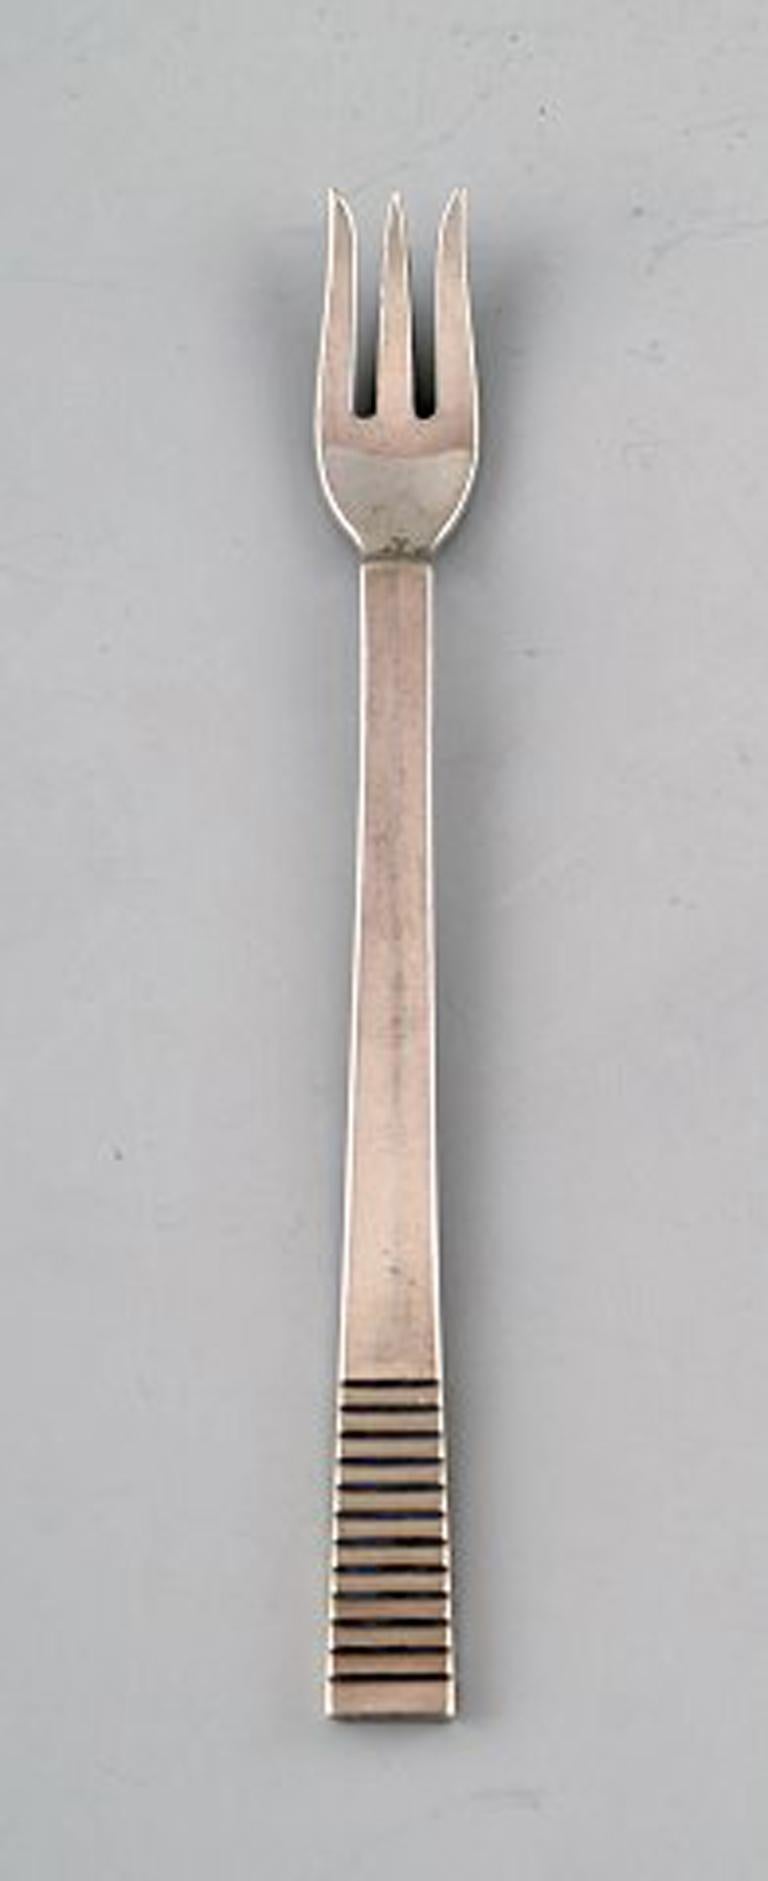 Georg Jensen Parallel. Cold meat fork in sterling silver. 7 pieces in stock.
Measures 14.5 cm
Stamped.
In very good condition.